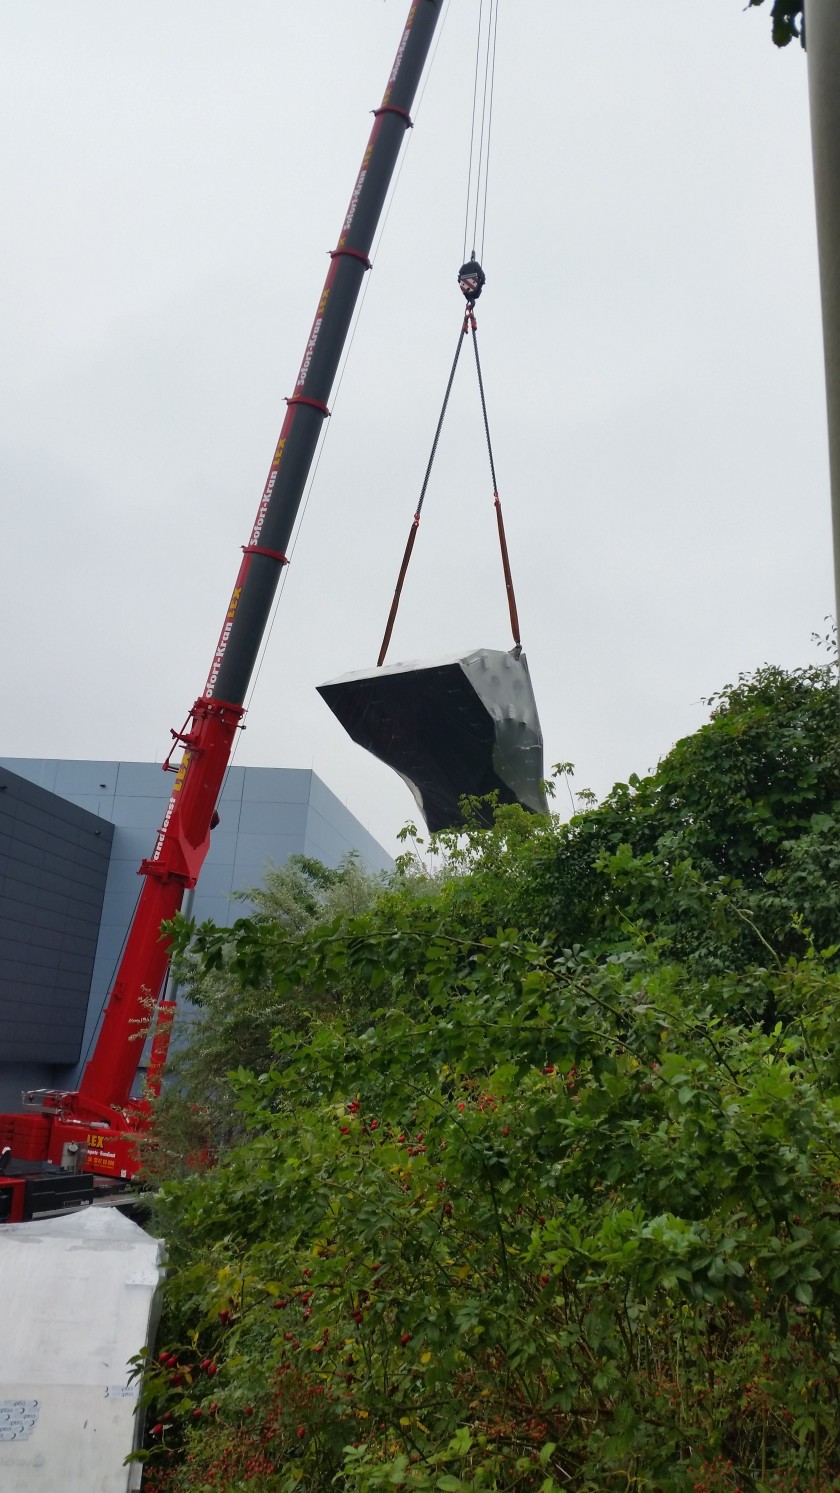 At first, the various parts are carefully unloaded so that they can be lifted quickly into the building through the roof of the NEAT building's newest addition.</p>
<p>